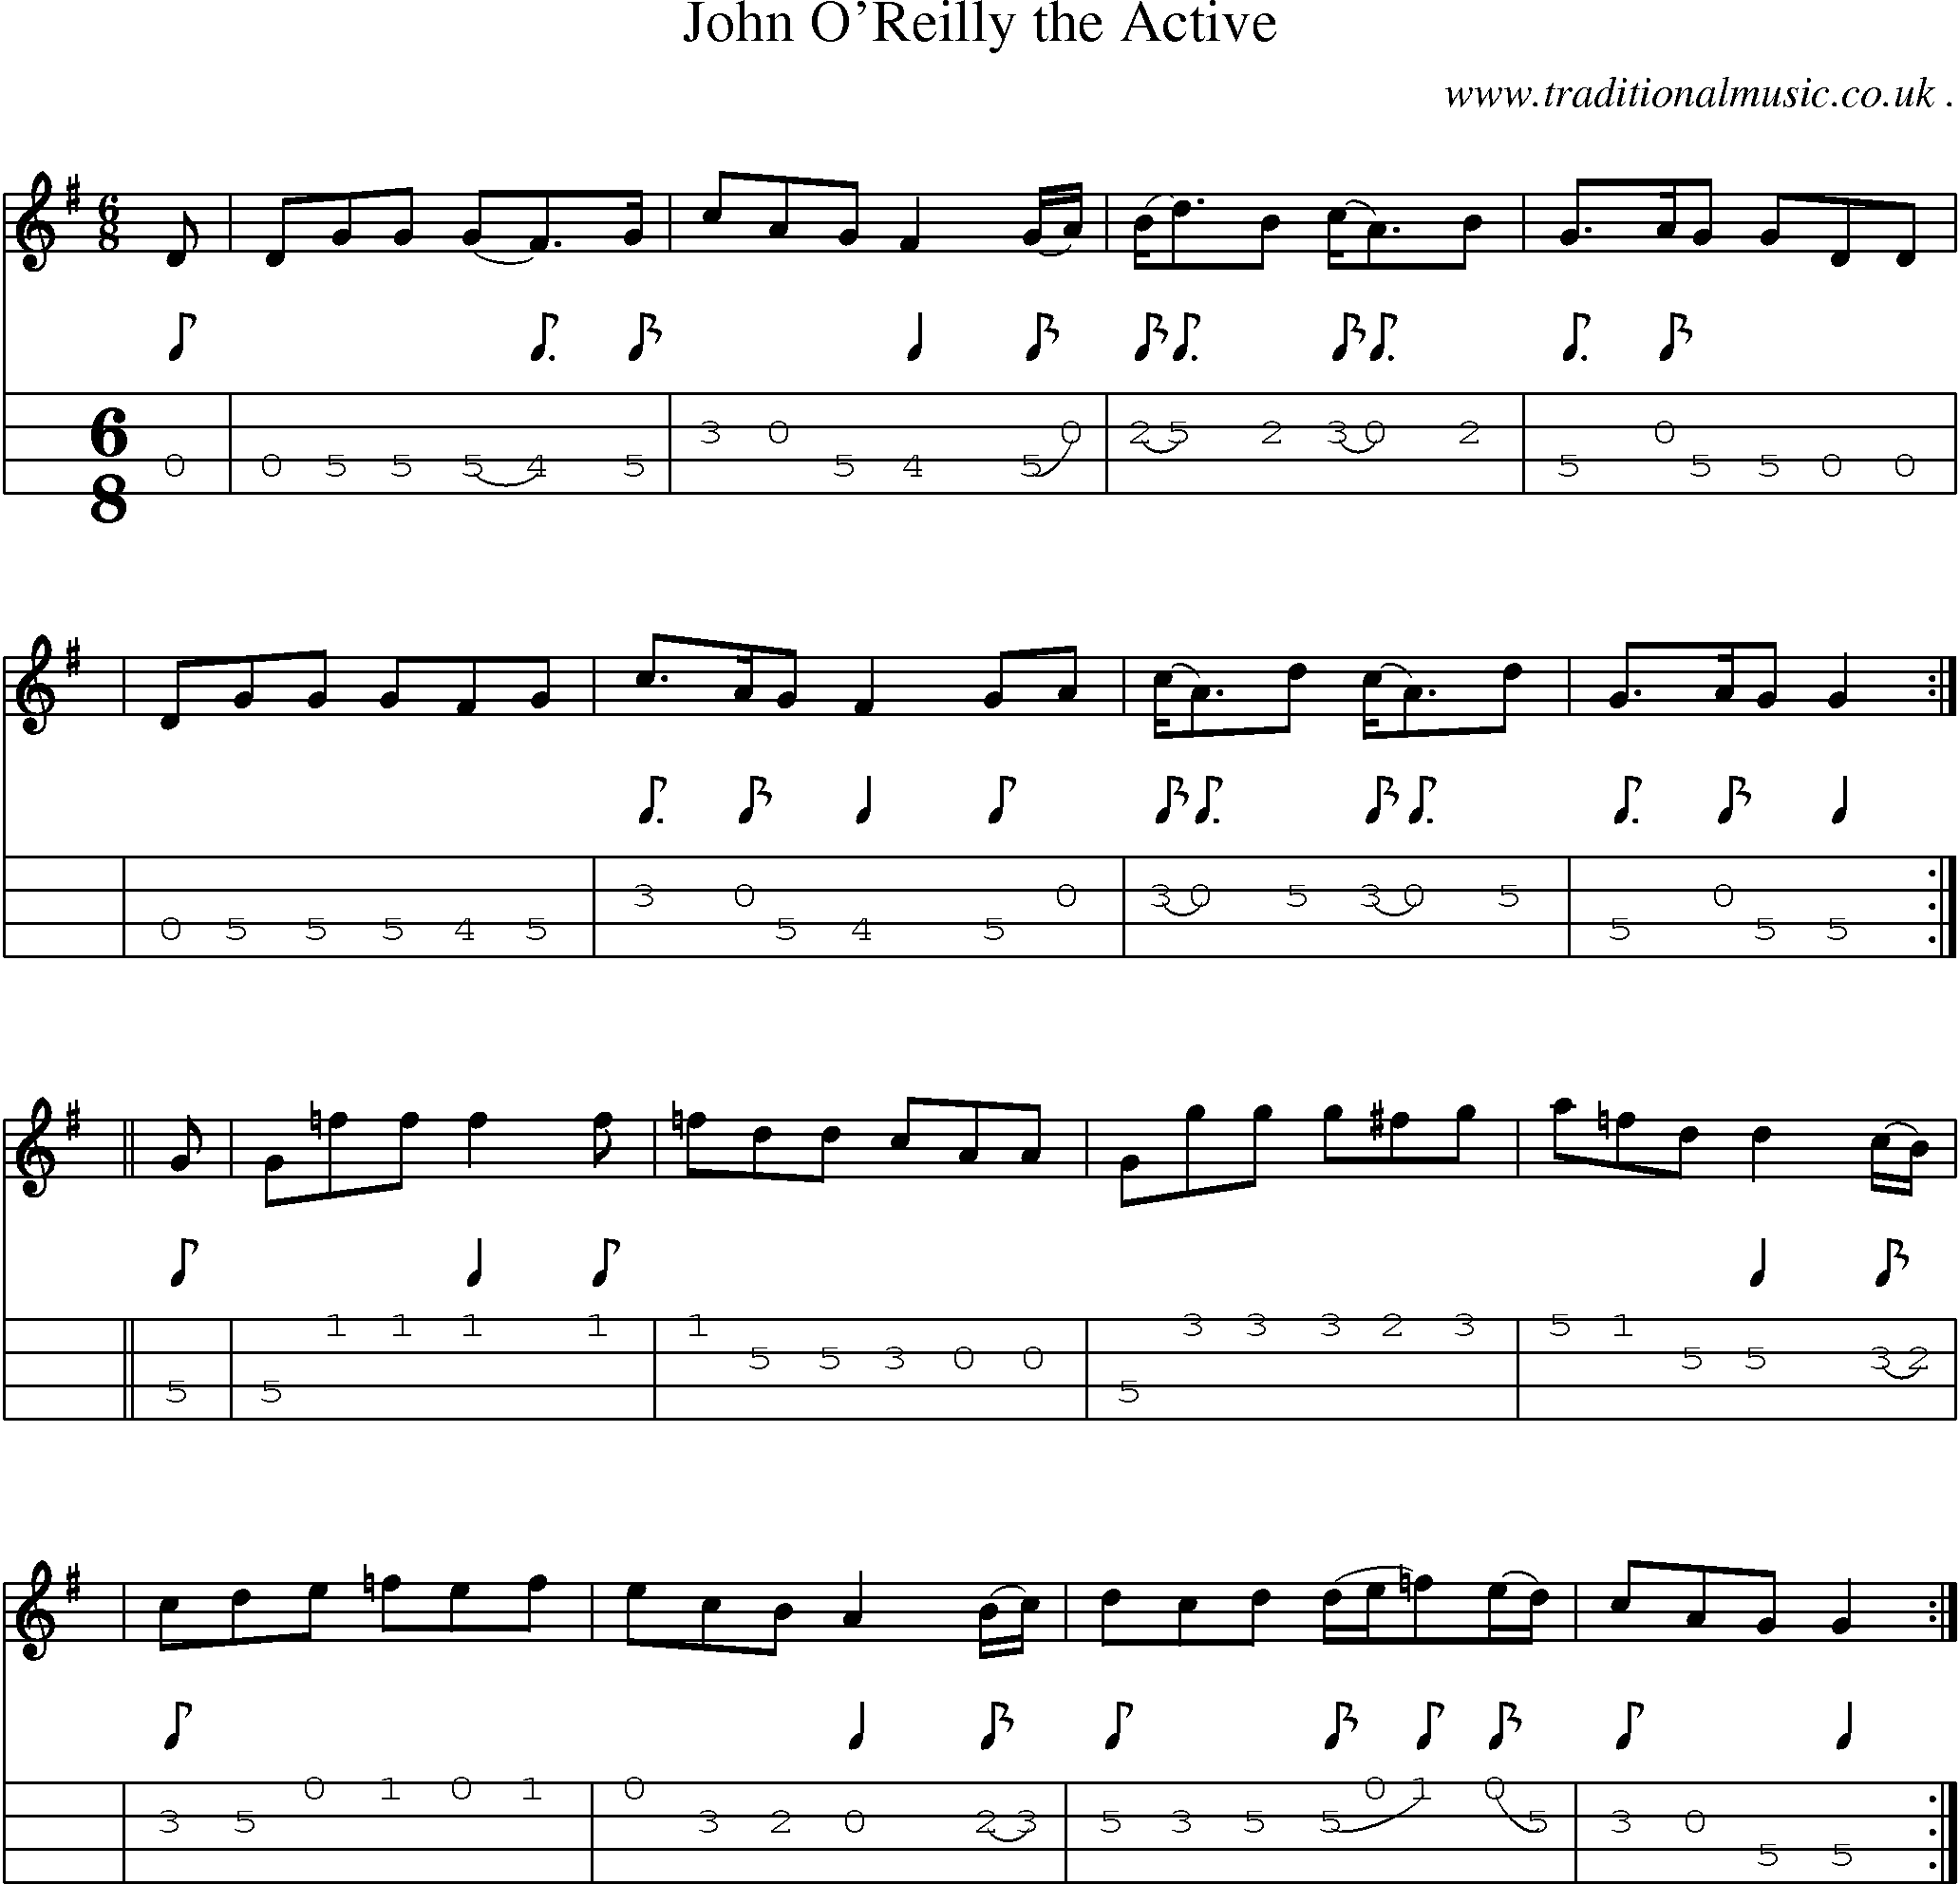 Sheet-music  score, Chords and Mandolin Tabs for John Oreilly The Active